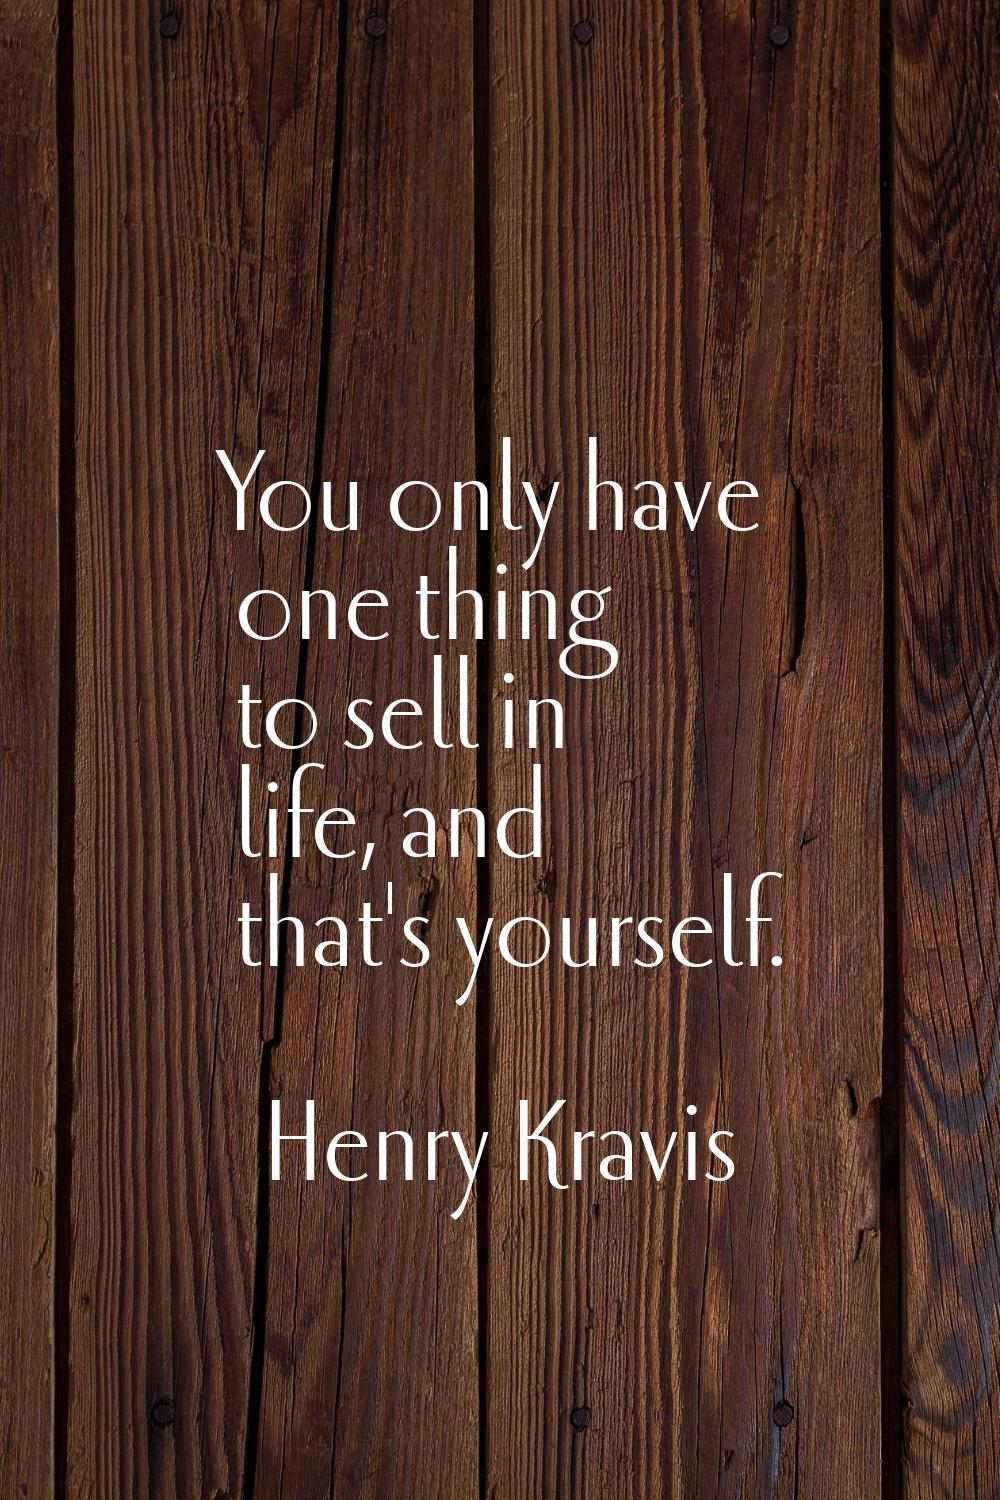 You only have one thing to sell in life, and that's yourself.